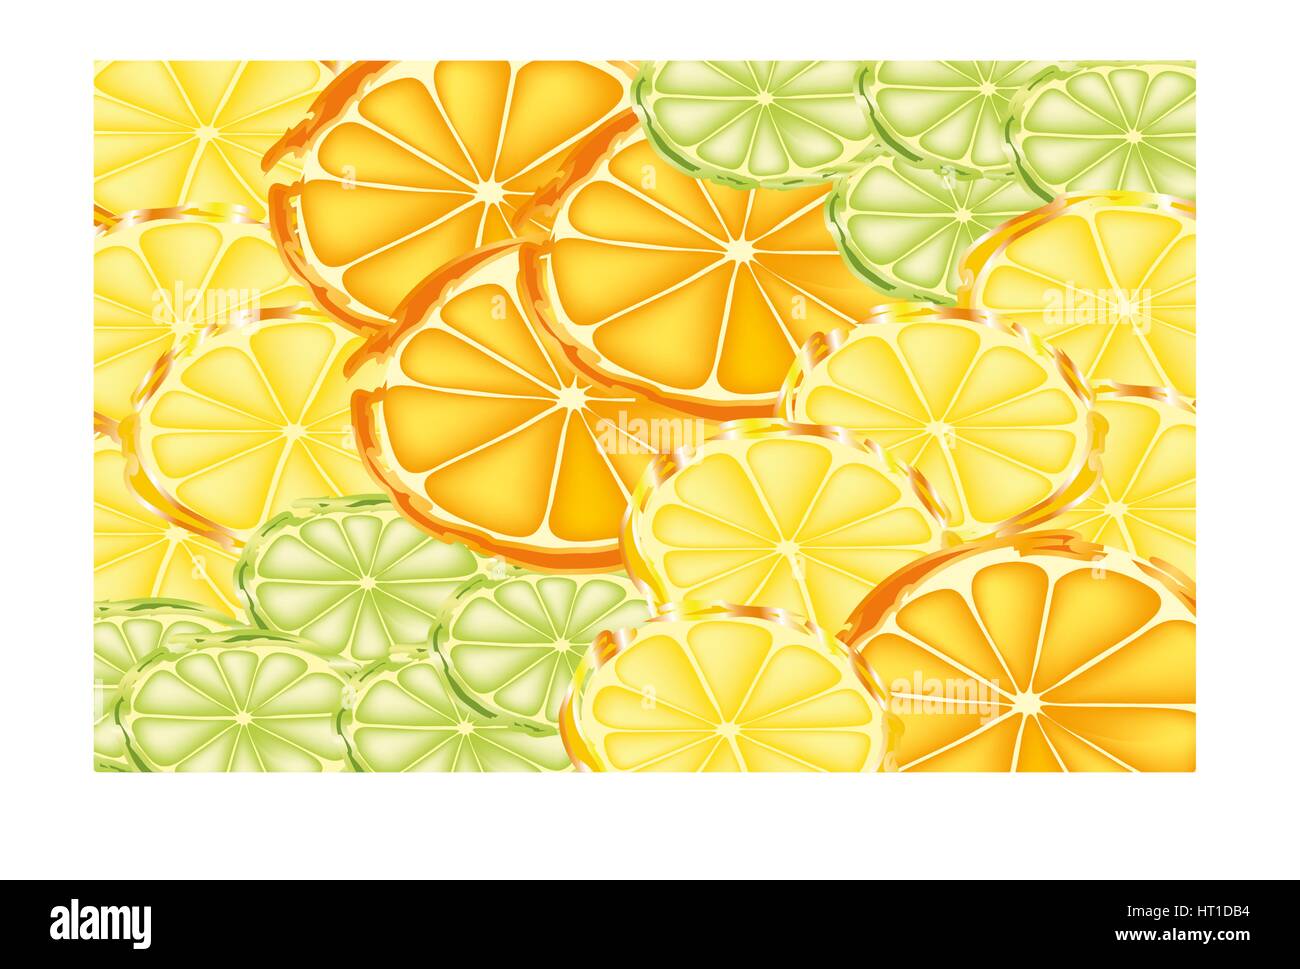 Slices of oranges, lemons, and limes Stock Photo